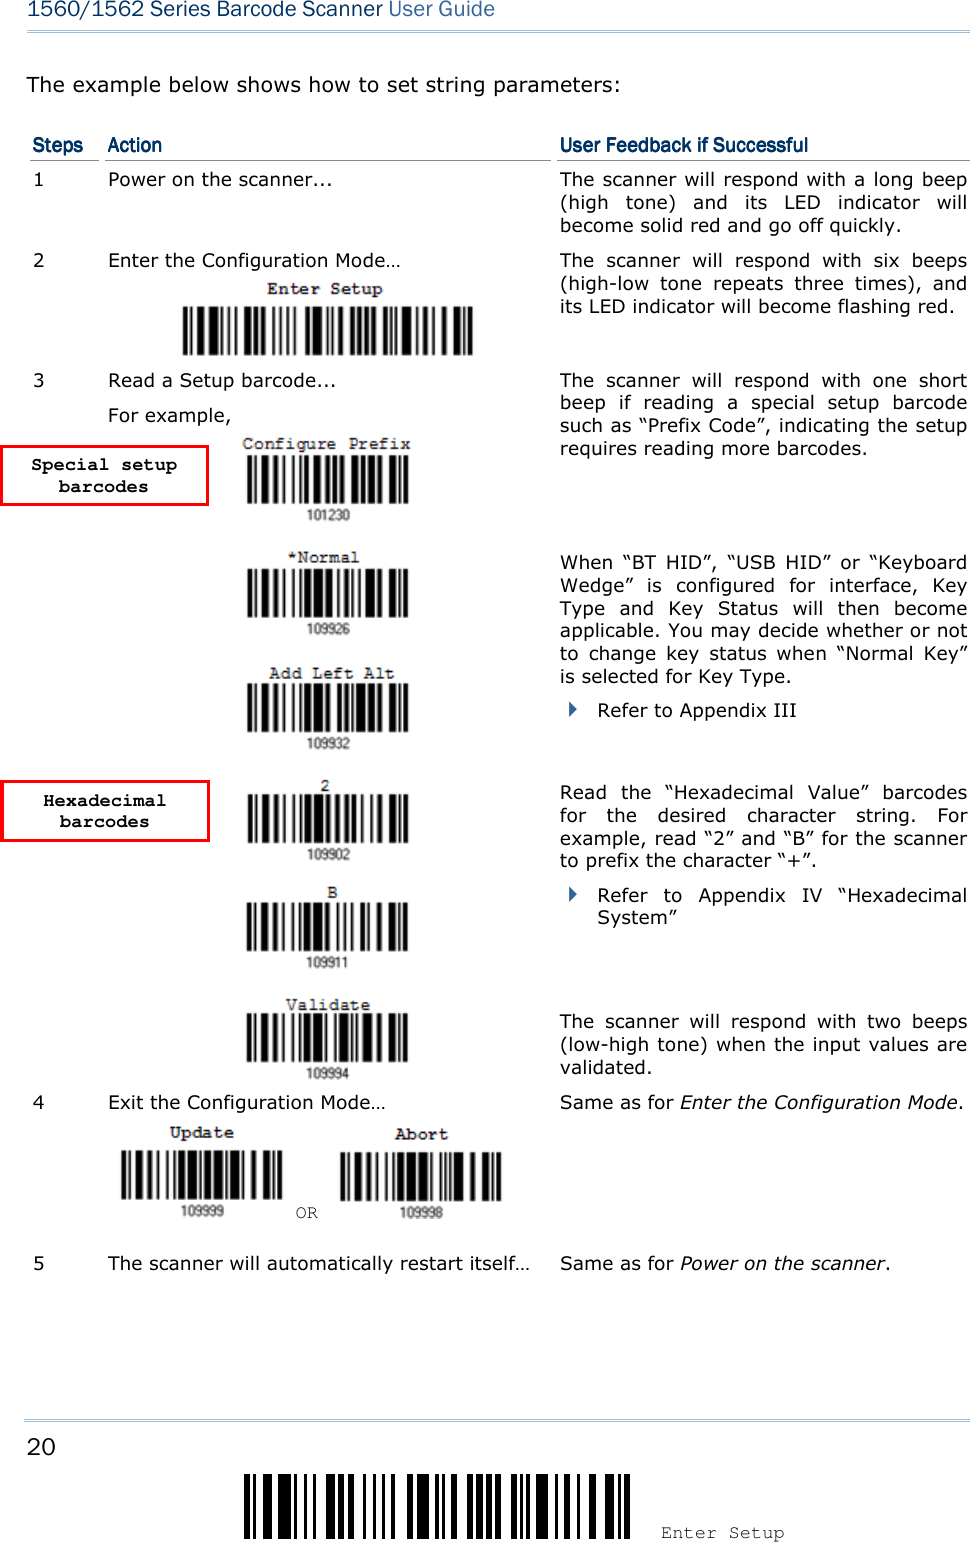 20 Enter Setup 1560/1562 Series Barcode Scanner User Guide  The example below shows how to set string parameters: StepsStepsStepsSteps     ActionActionActionAction     User Feedback if SuccessfulUser Feedback if SuccessfulUser Feedback if SuccessfulUser Feedback if Successful    1  Power on the scanner...  The scanner will respond with a long beep (high  tone)  and  its  LED  indicator  will become solid red and go off quickly. 2  Enter the Configuration Mode…  The  scanner  will  respond  with  six  beeps (high-low  tone  repeats  three  times),  and its LED indicator will become flashing red.  3  Read a Setup barcode... For example,   The  scanner  will  respond  with  one  short beep  if  reading  a  special  setup  barcode such as “Prefix Code”, indicating the setup requires reading more barcodes.        When  “BT  HID”,  “USB  HID”  or  “Keyboard Wedge” is  configured  for  interface,  Key Type  and  Key  Status  will  then  become applicable. You may decide whether or not to  change  key  status when  “Normal  Key” is selected for Key Type.  Refer to Appendix III      Read  the  “Hexadecimal  Value”  barcodes for  the  desired  character  string.  For example, read “2” and “B” for the scanner to prefix the character “+”.  Refer  to  Appendix  IV “Hexadecimal System”   The  scanner  will  respond  with  two  beeps (low-high tone) when the input values are validated. 4  Exit the Configuration Mode…    OR     Same as for Enter the Configuration Mode. 5  The scanner will automatically restart itself…  Same as for Power on the scanner.   Hexadecimal barcodes Special setup barcodes 